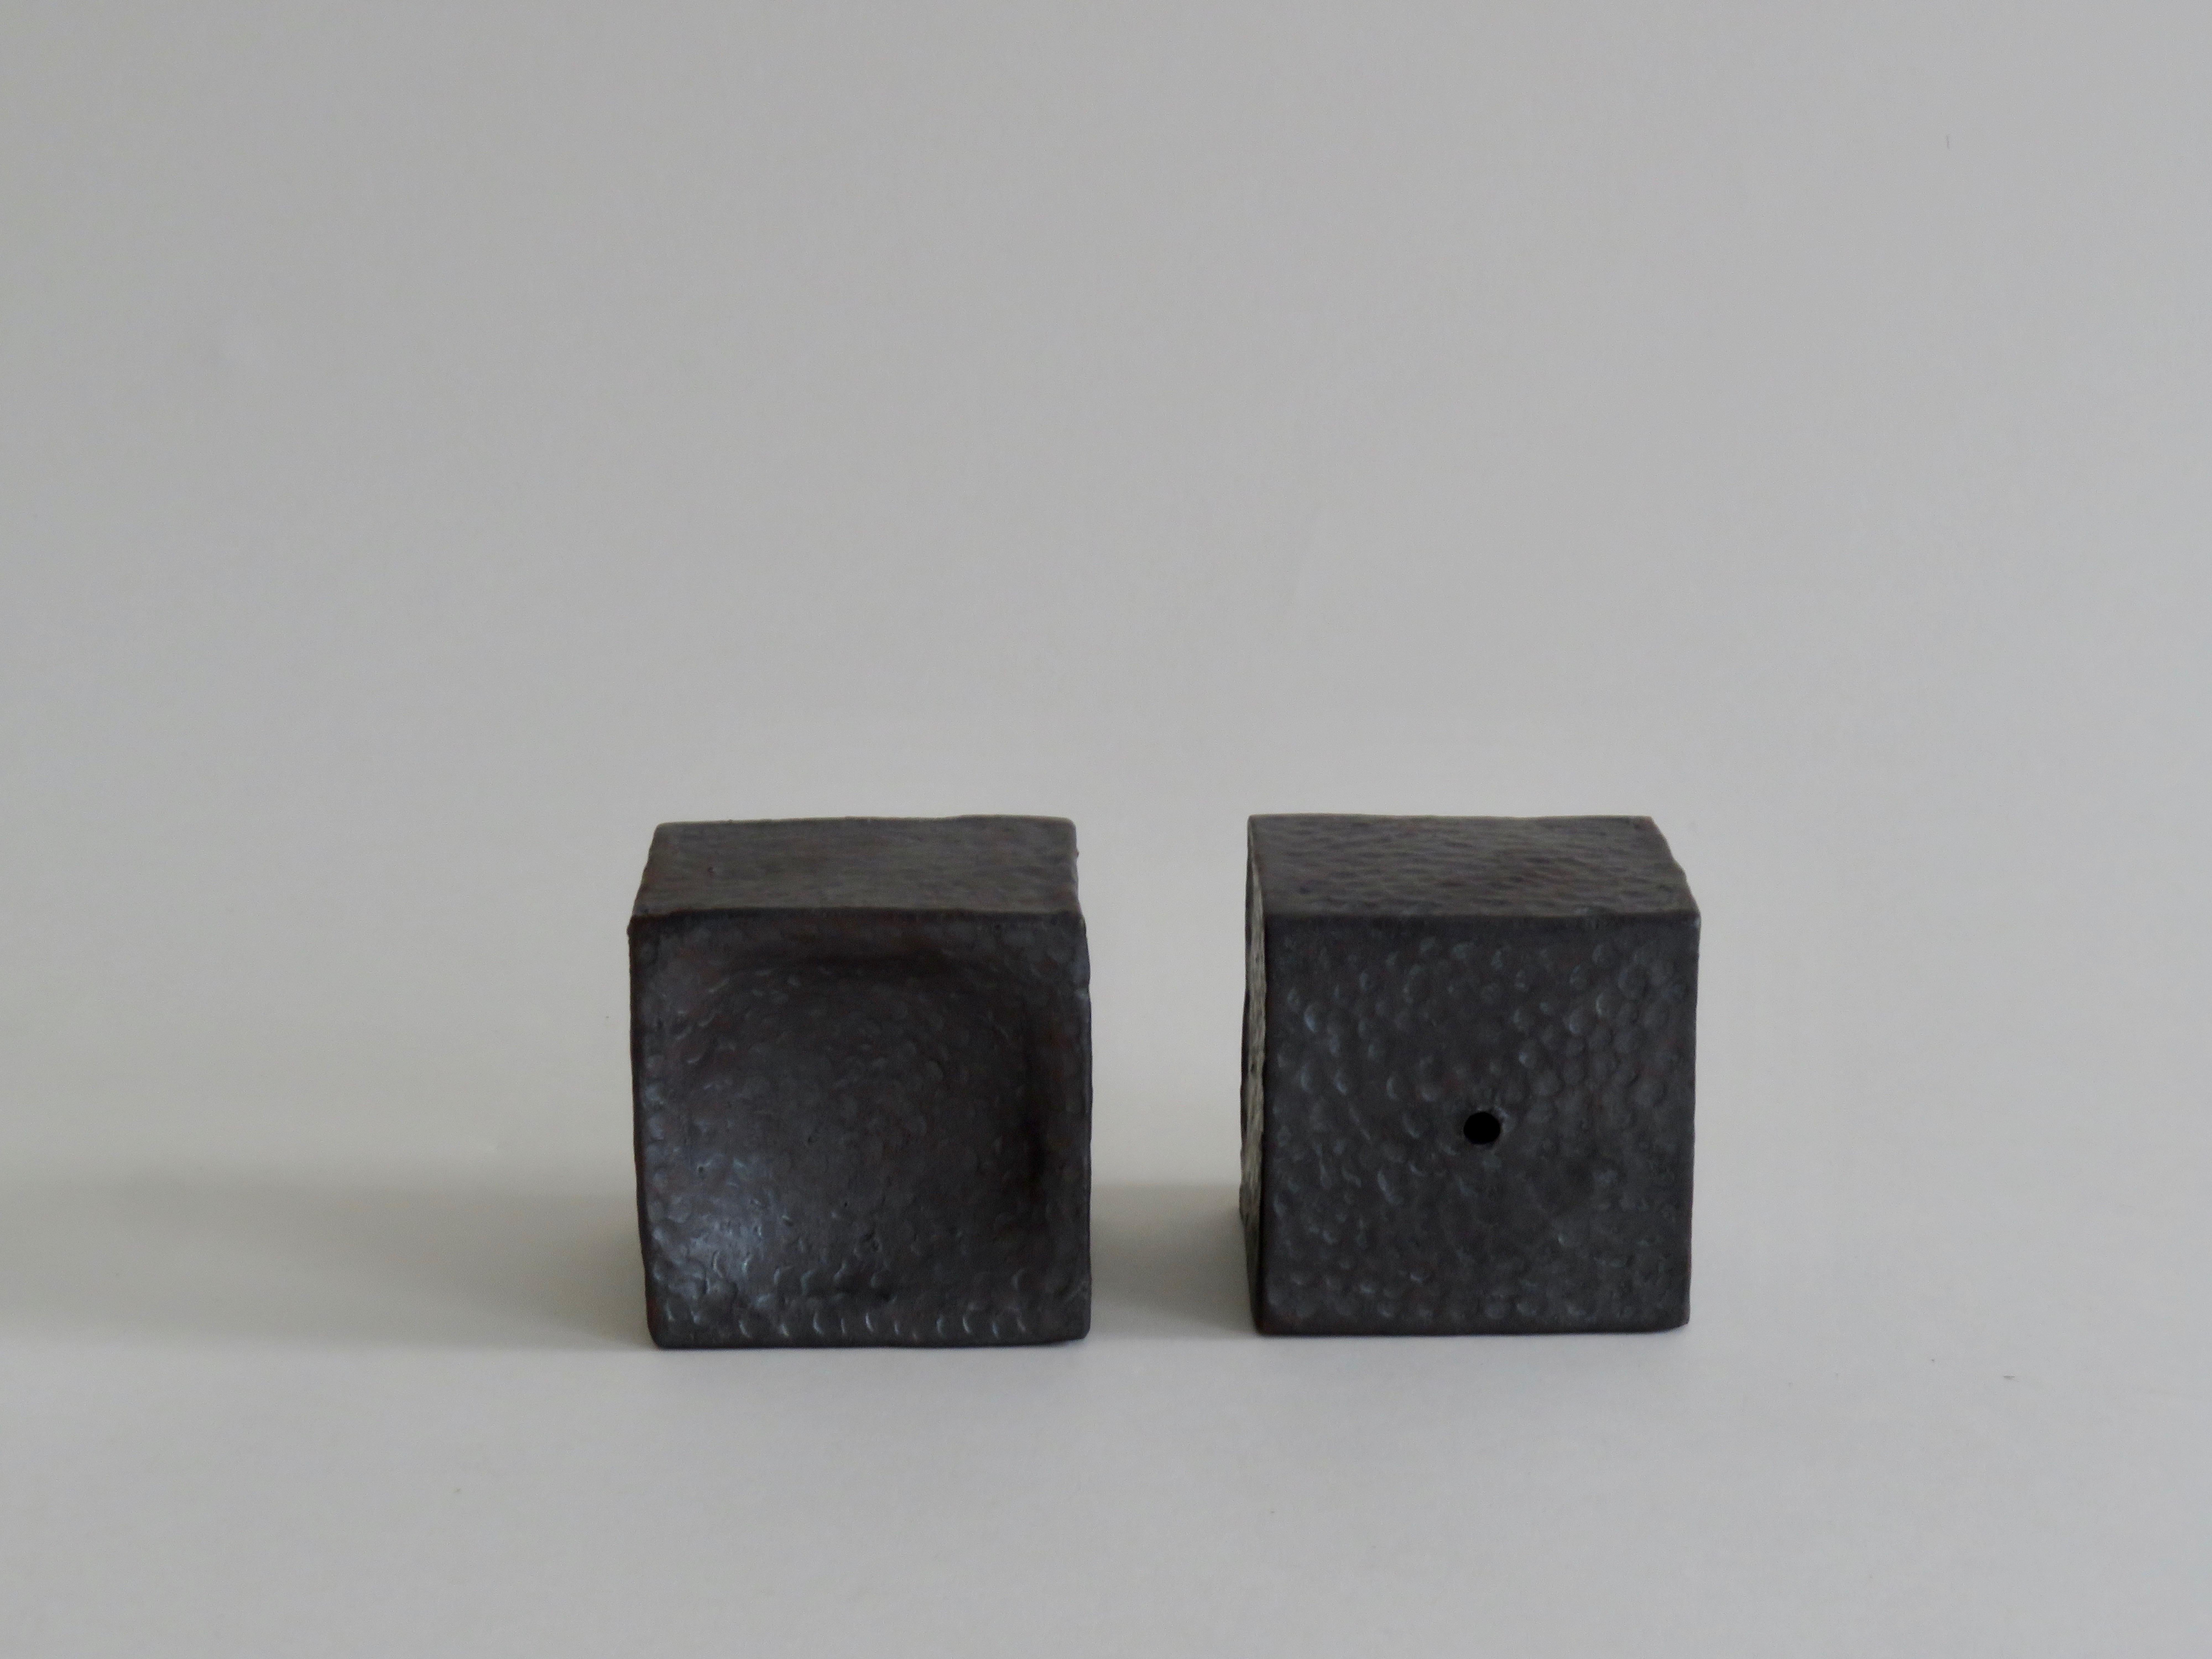 Small Ceramic Contemplation Cube, Mottled Surface in Metallic Black-Brown Glaze 1